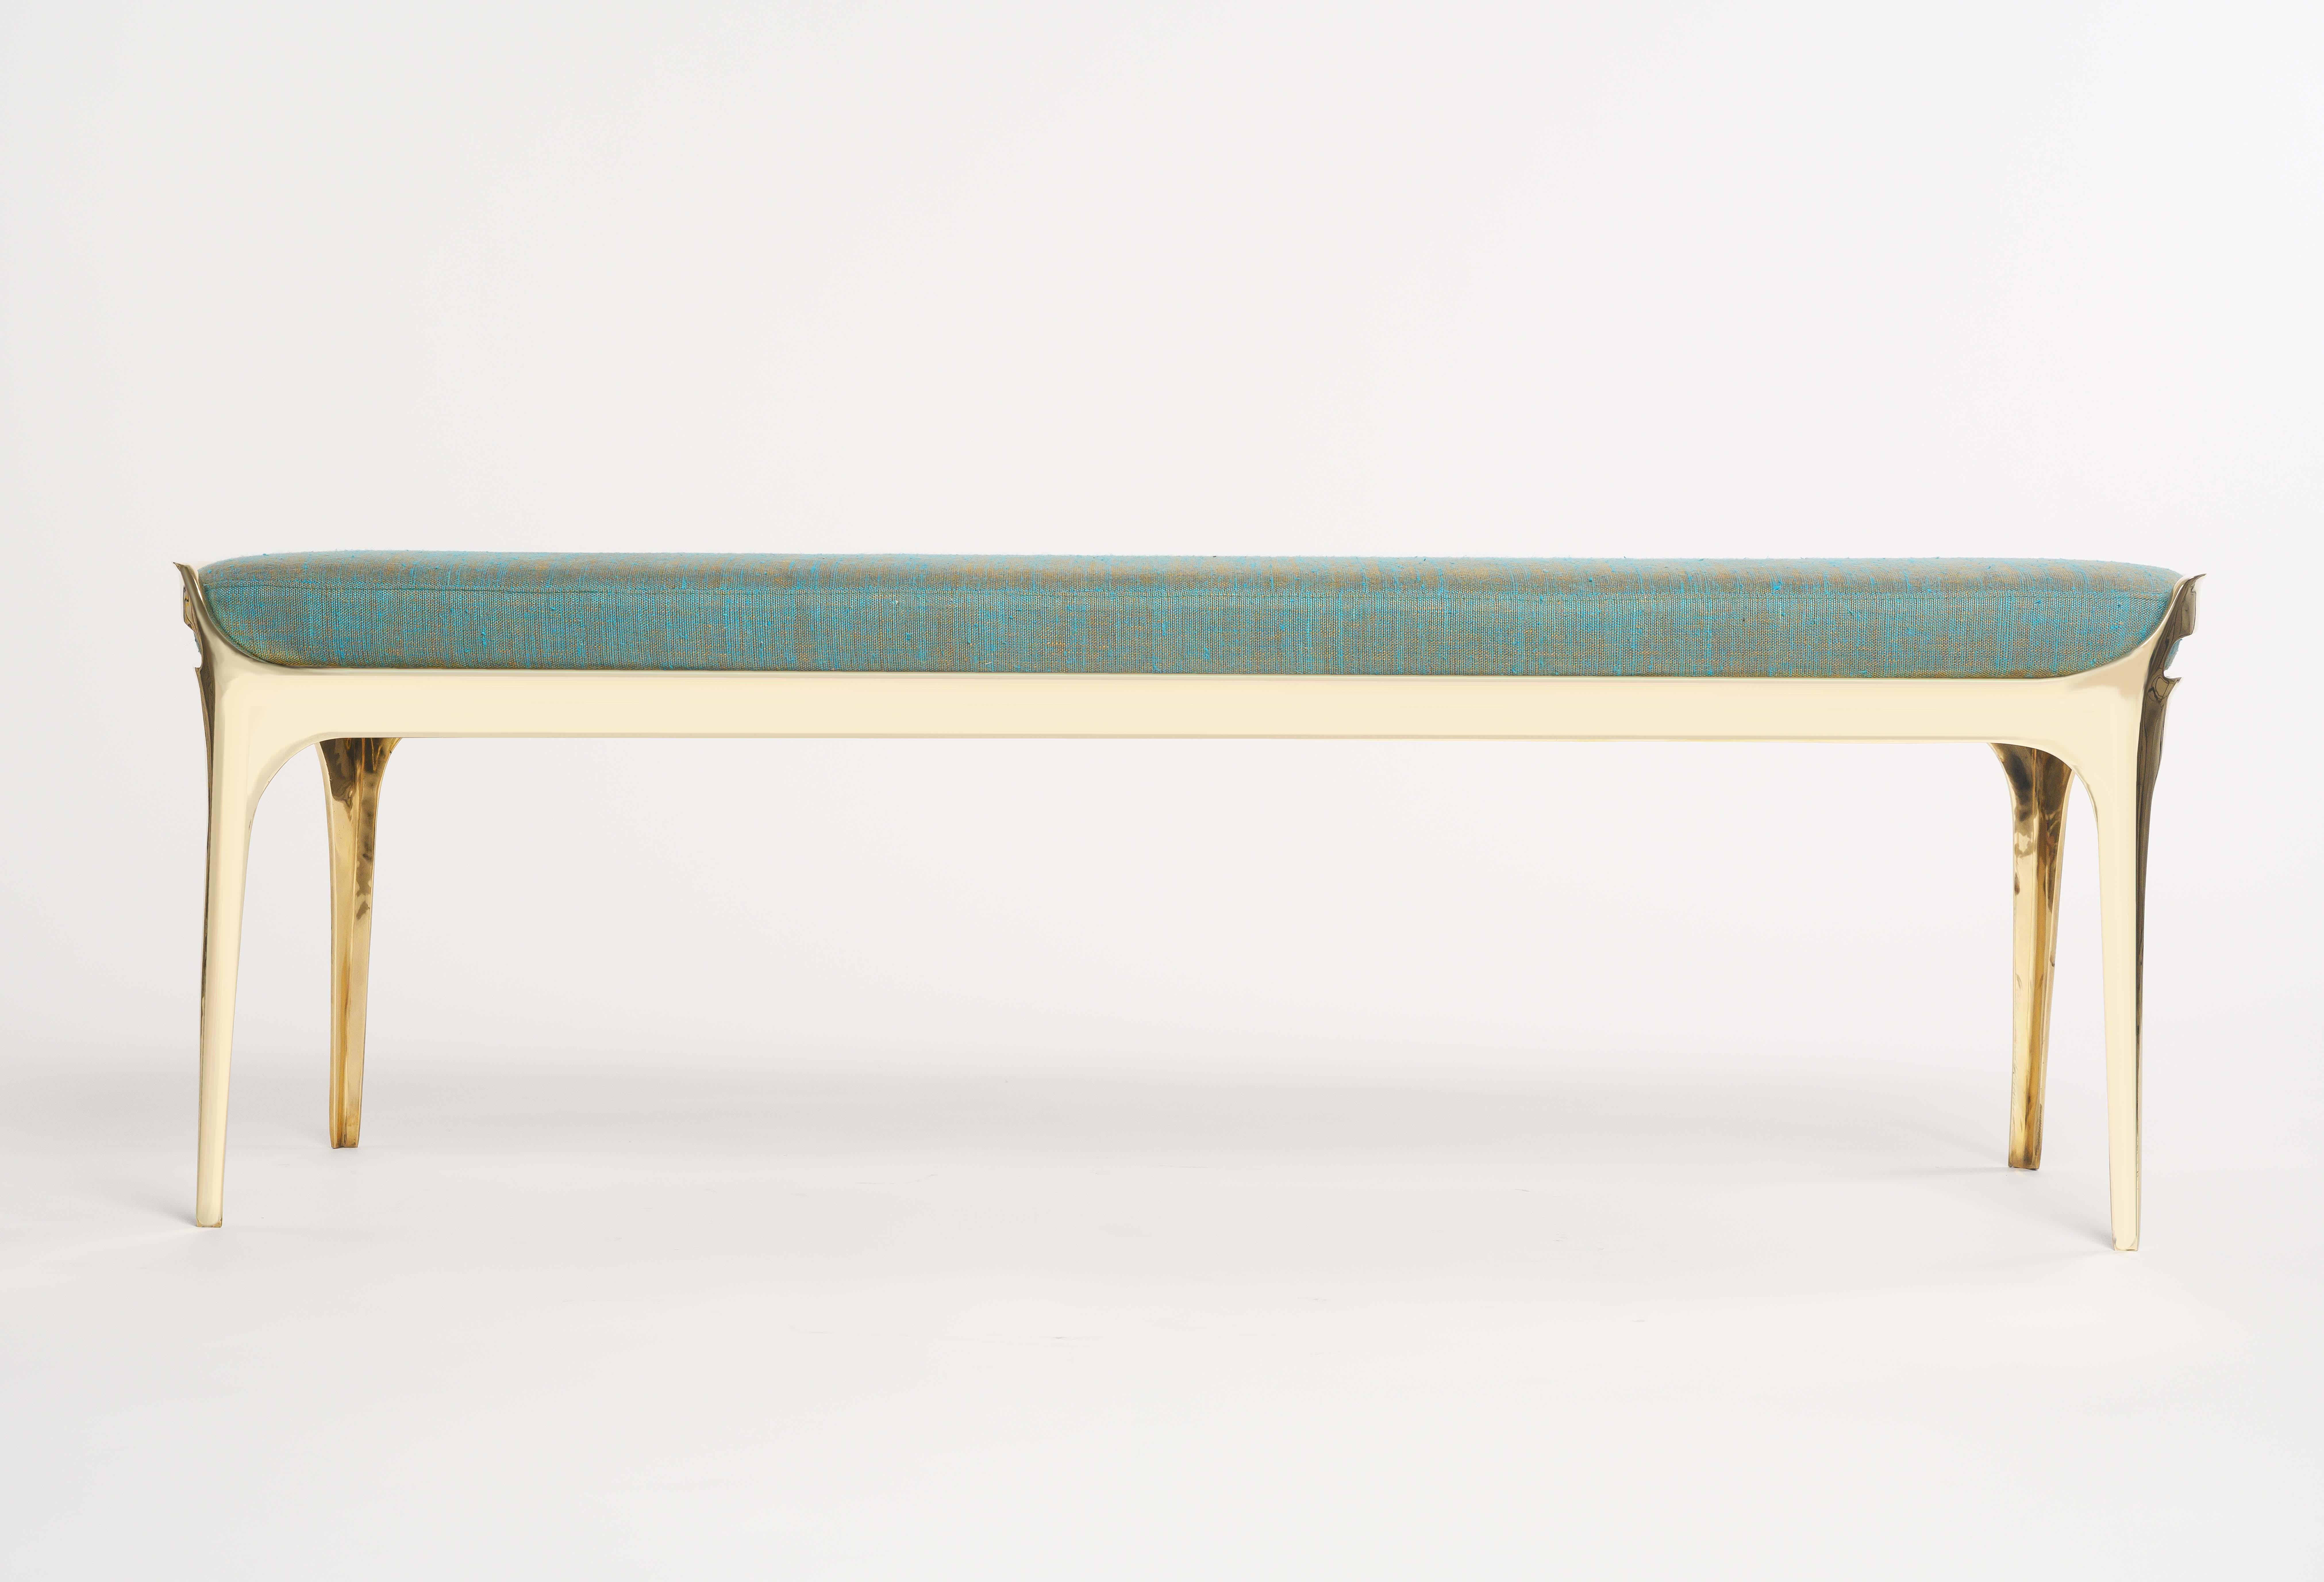 Contemporary Bruda Bench with Gold Bronze Frame and Blue Seat by Elan Atelier (IN STOCK) For Sale